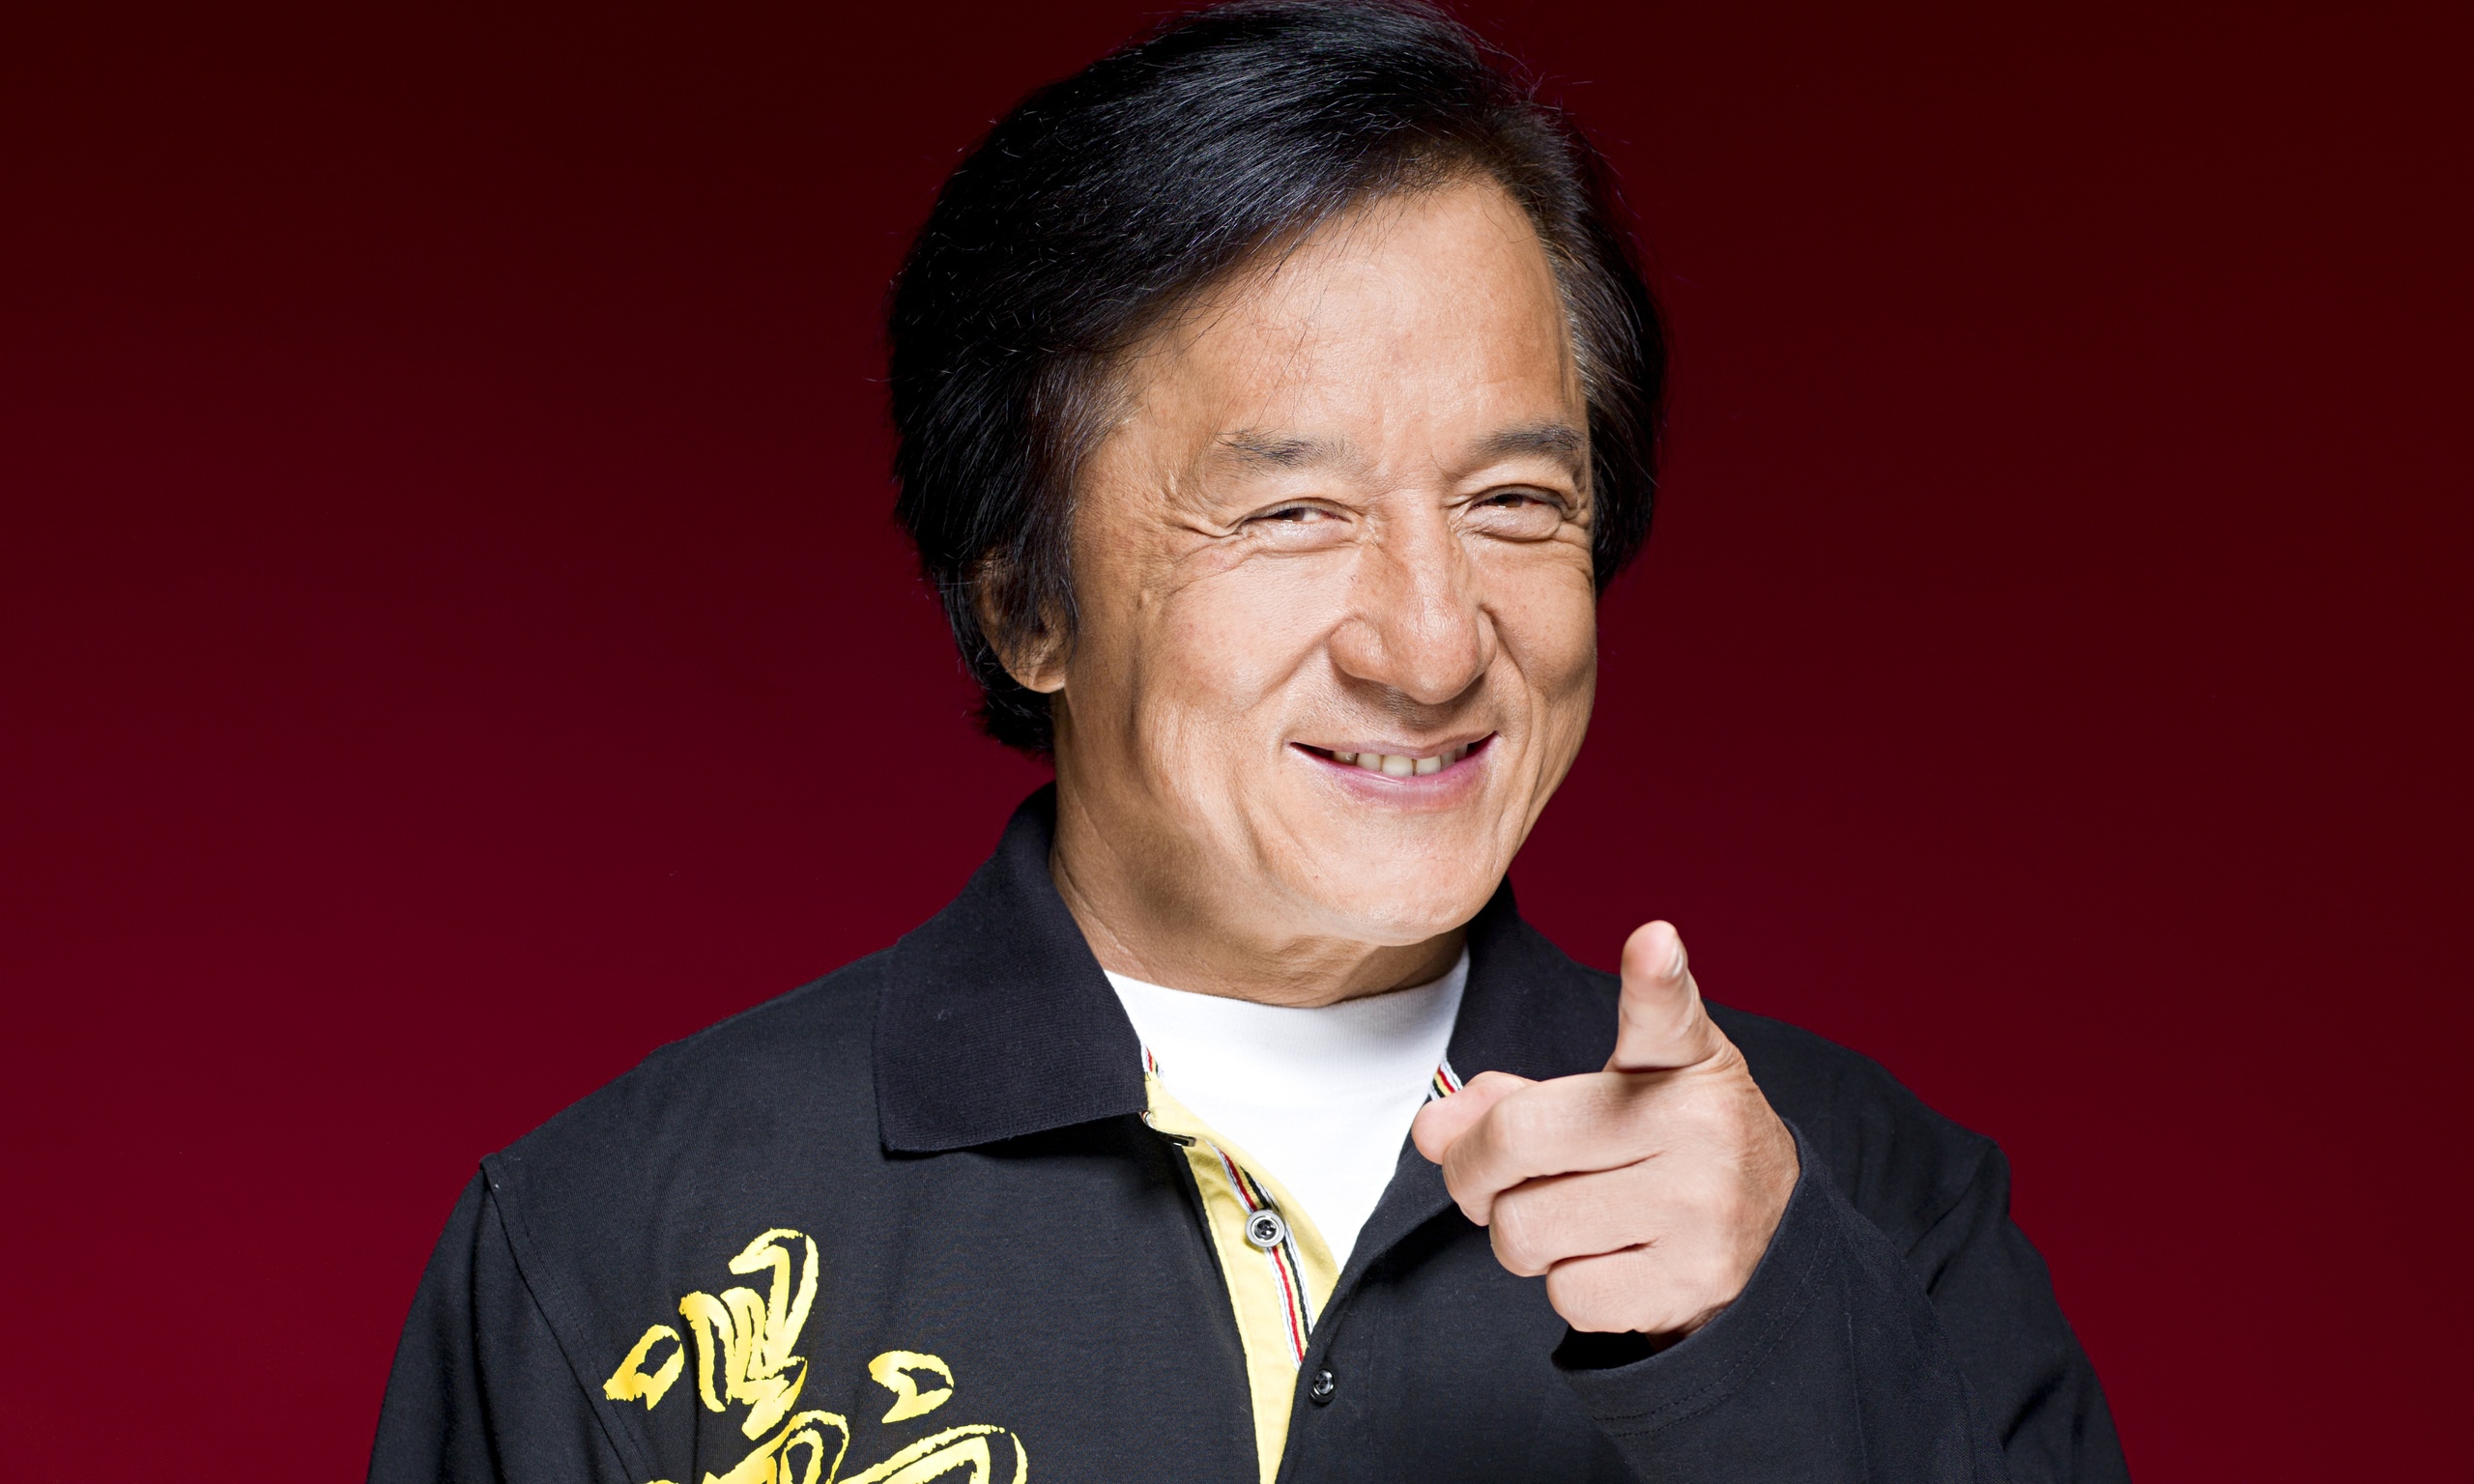 Jackie Chan Before And Now - 2560x1536 Wallpaper 